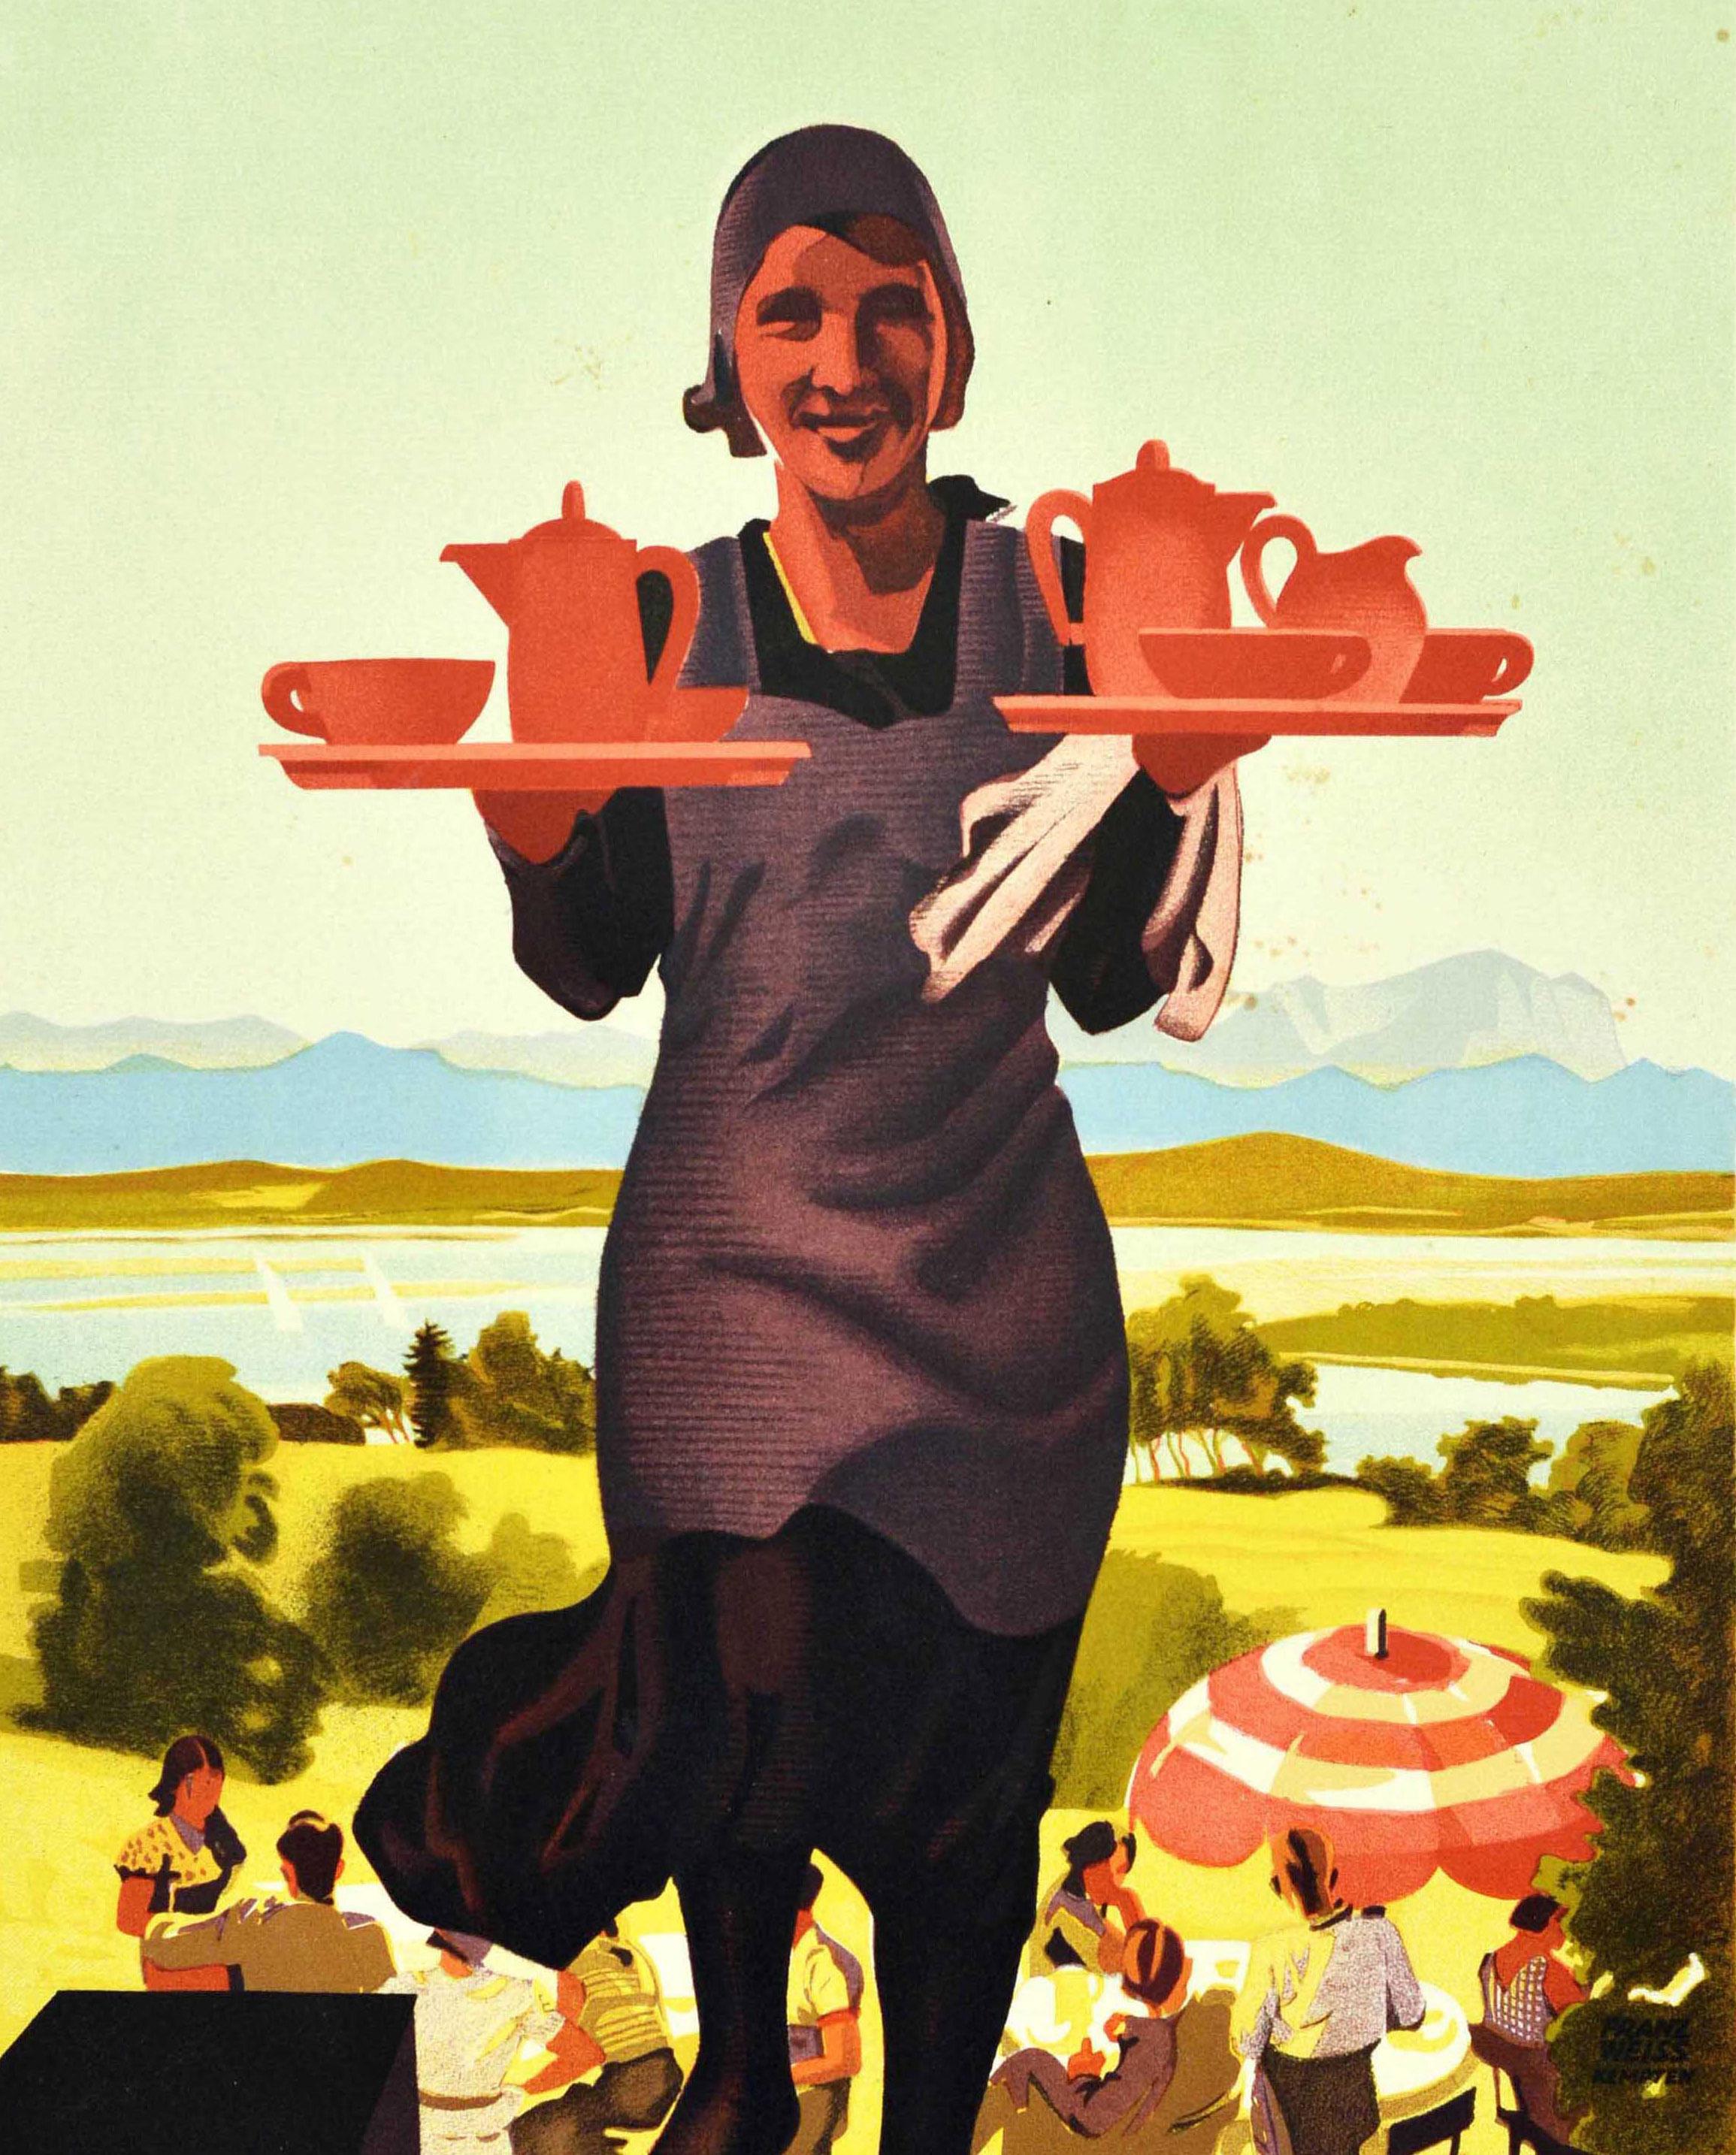 Original vintage poster for the Forsthaus Ilkahohe forester's house restaurant in Oberzeismering near Tutzing in Bavaria Germany. Great Art Deco design featuring a smiling lady in an apron carrying coffee and tea pots and cups on trays walking up